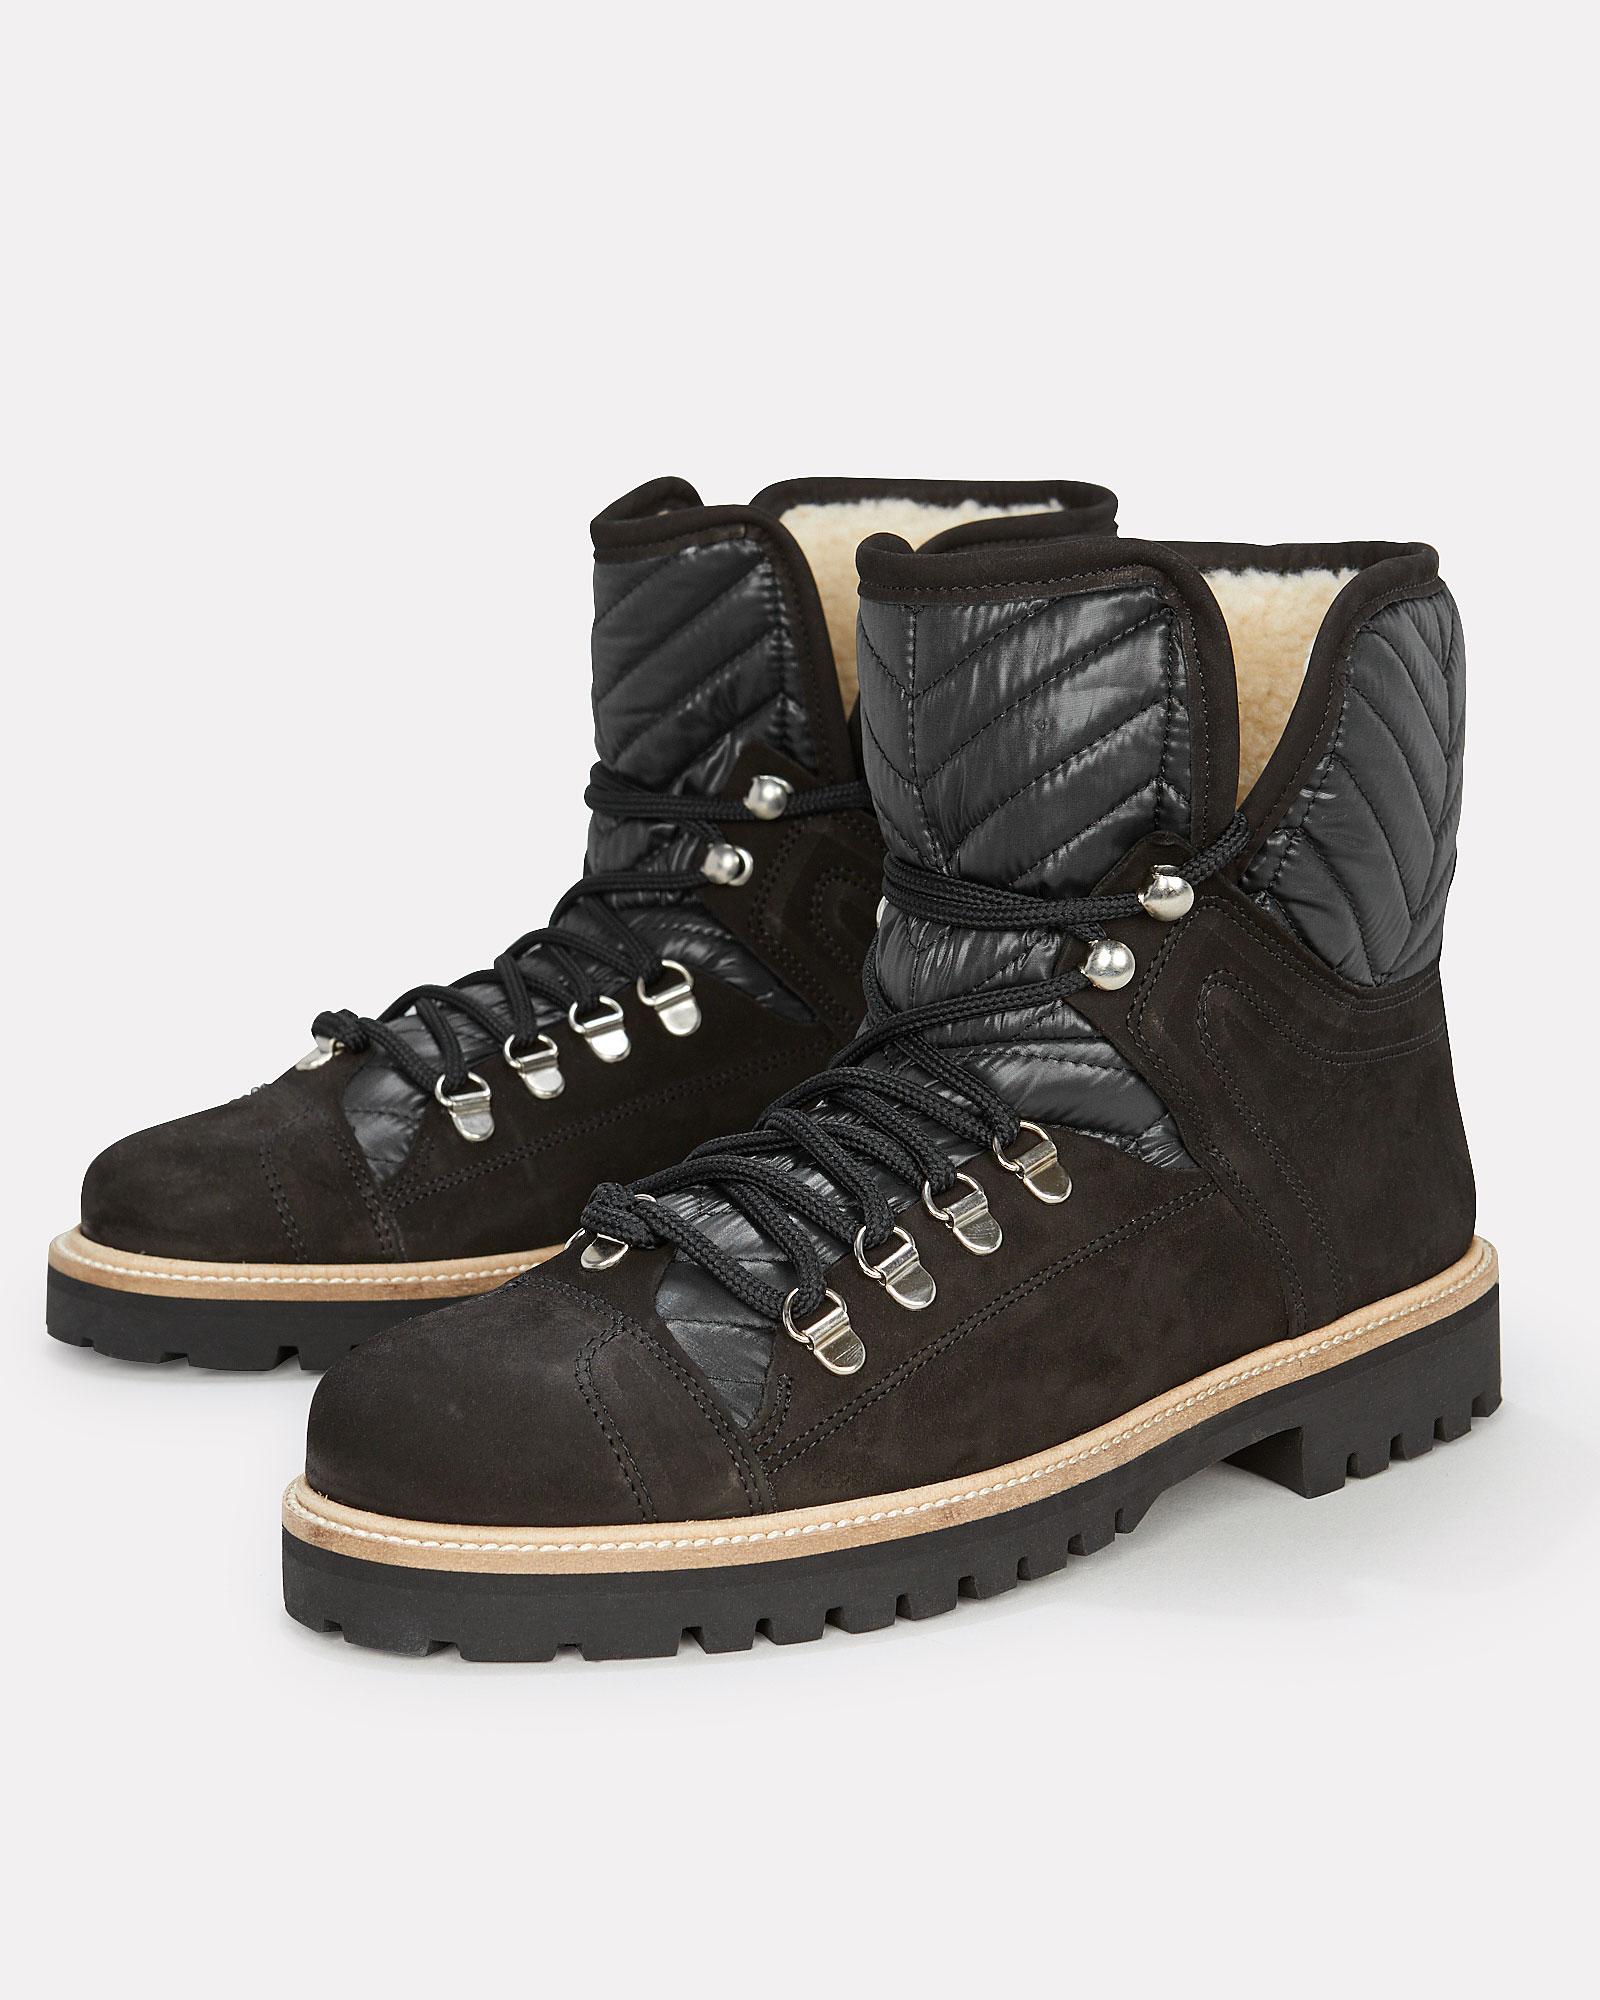 Ganni Winter Hiking Shearling Boots in Black - Lyst